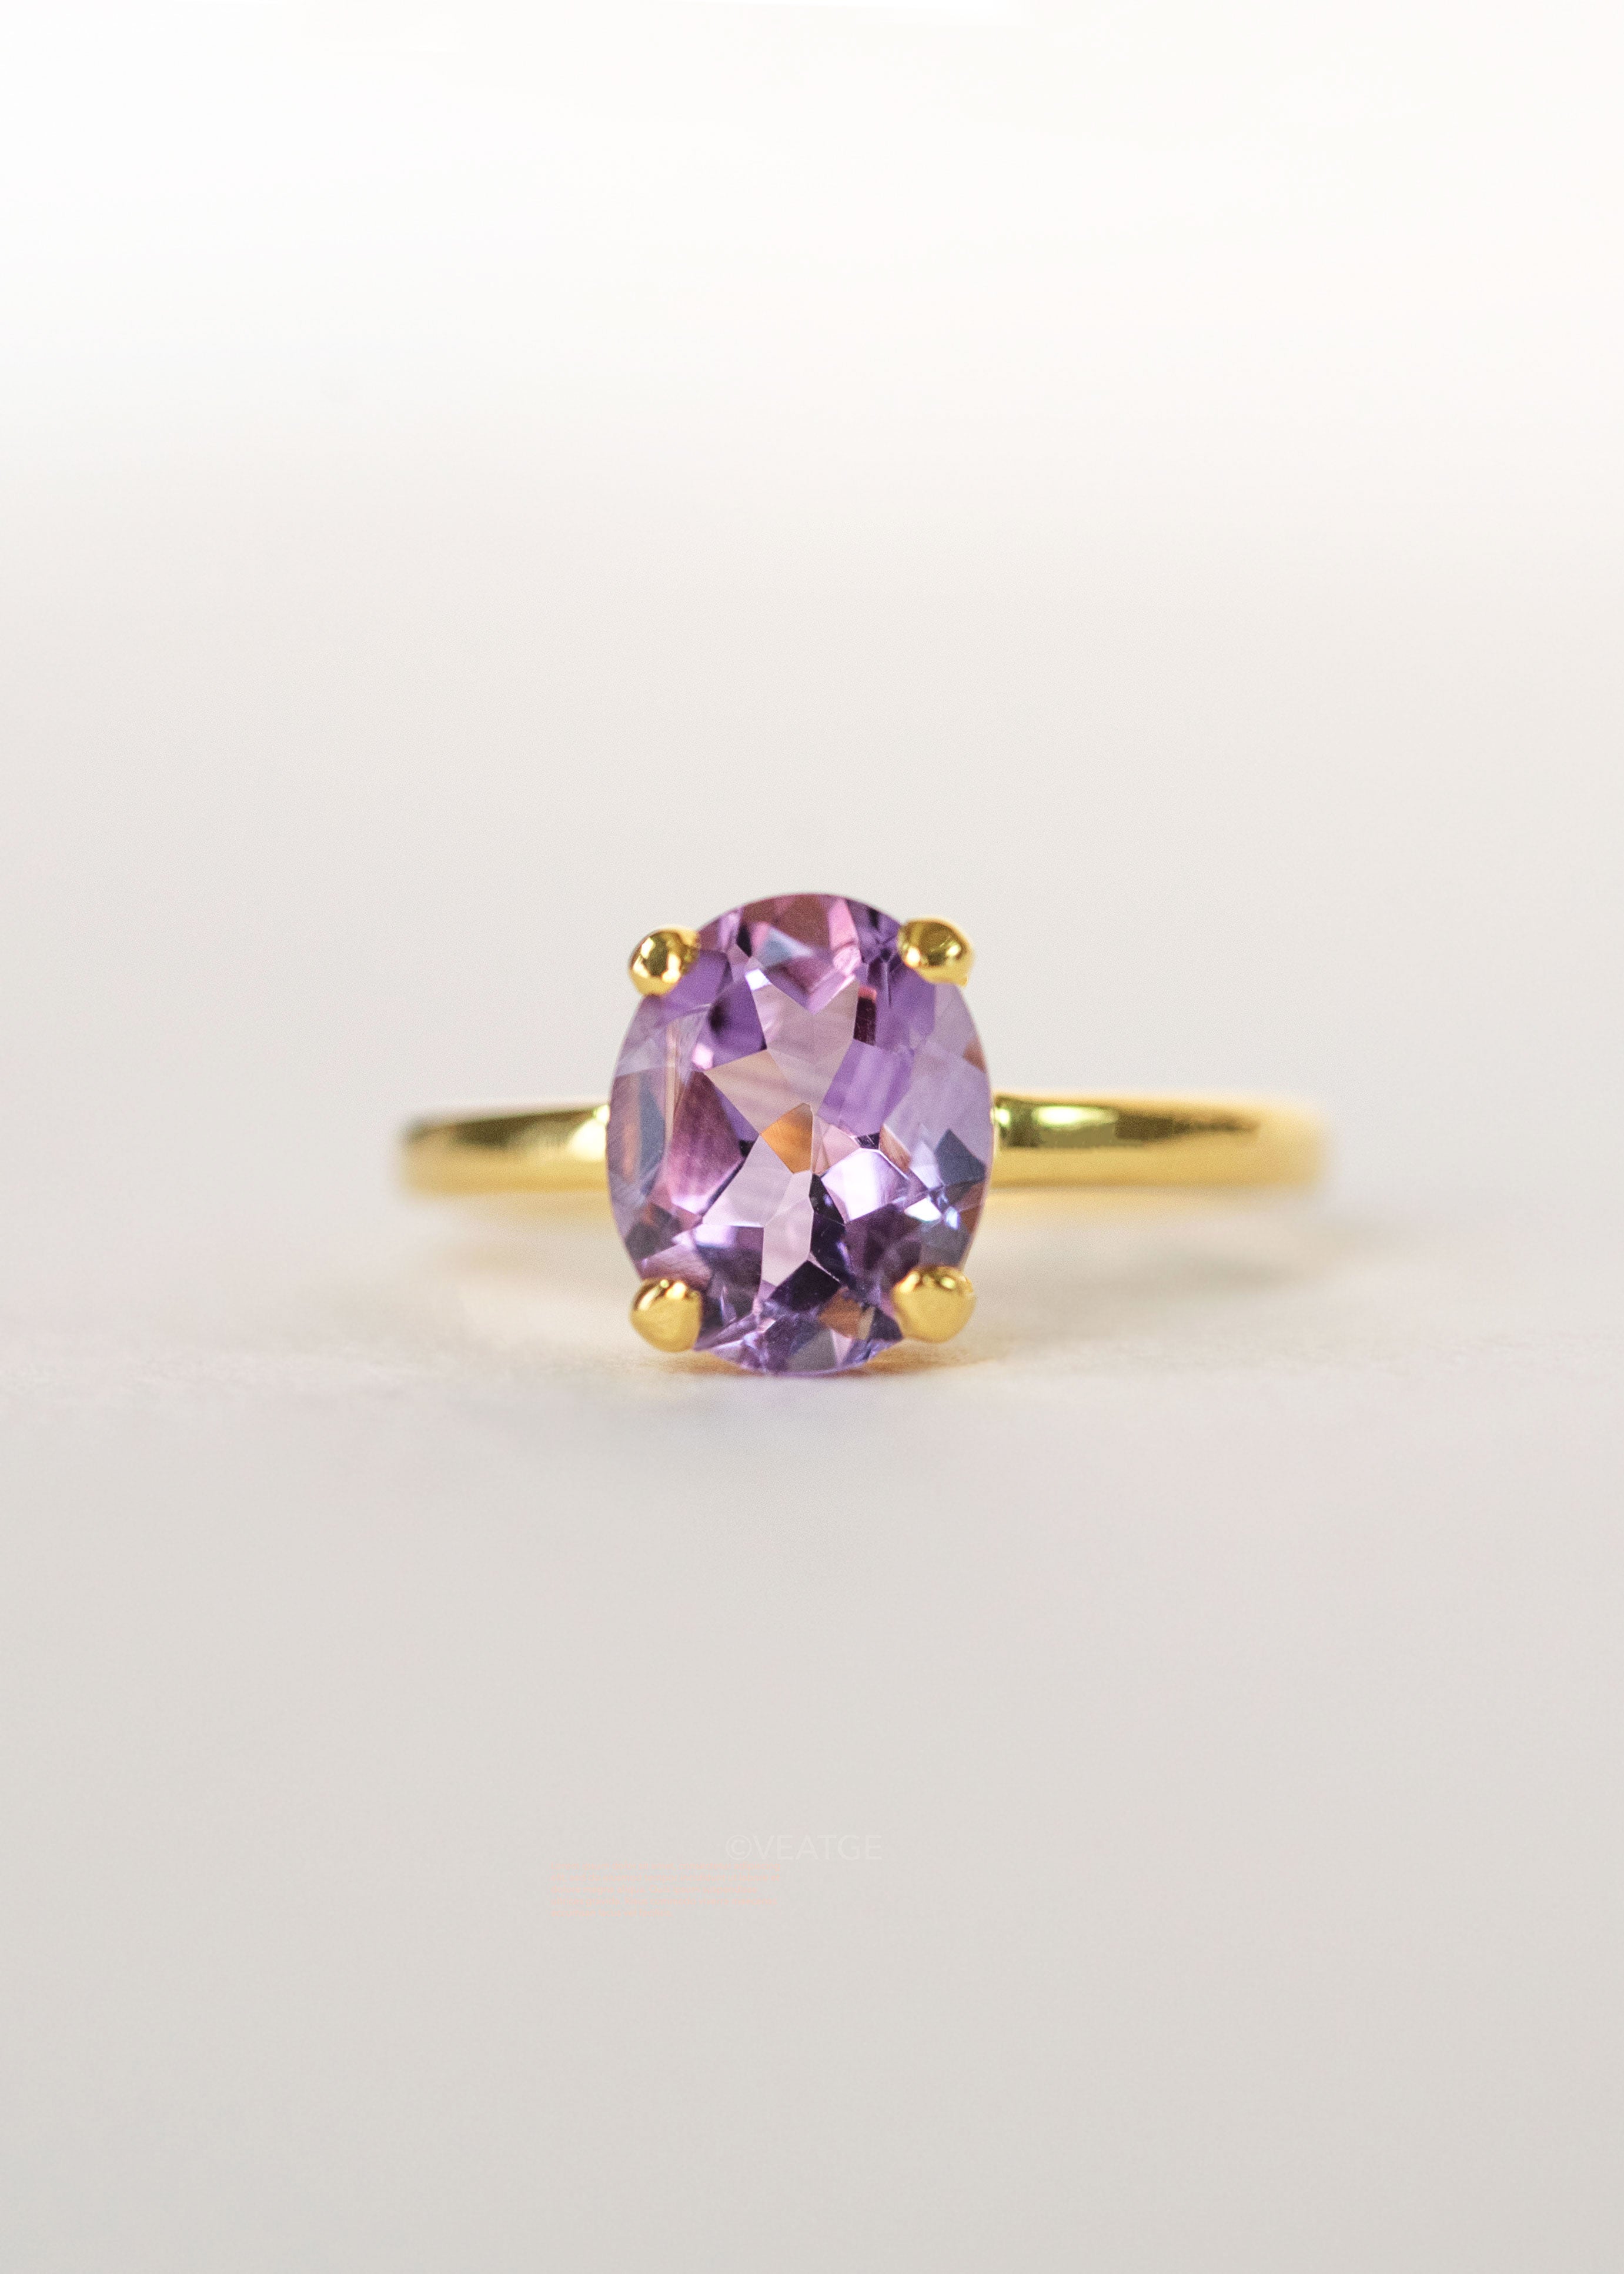 Large Amethyst Sterling Silver Gold Vermeil Ring, February Birthstone Gifts for Her